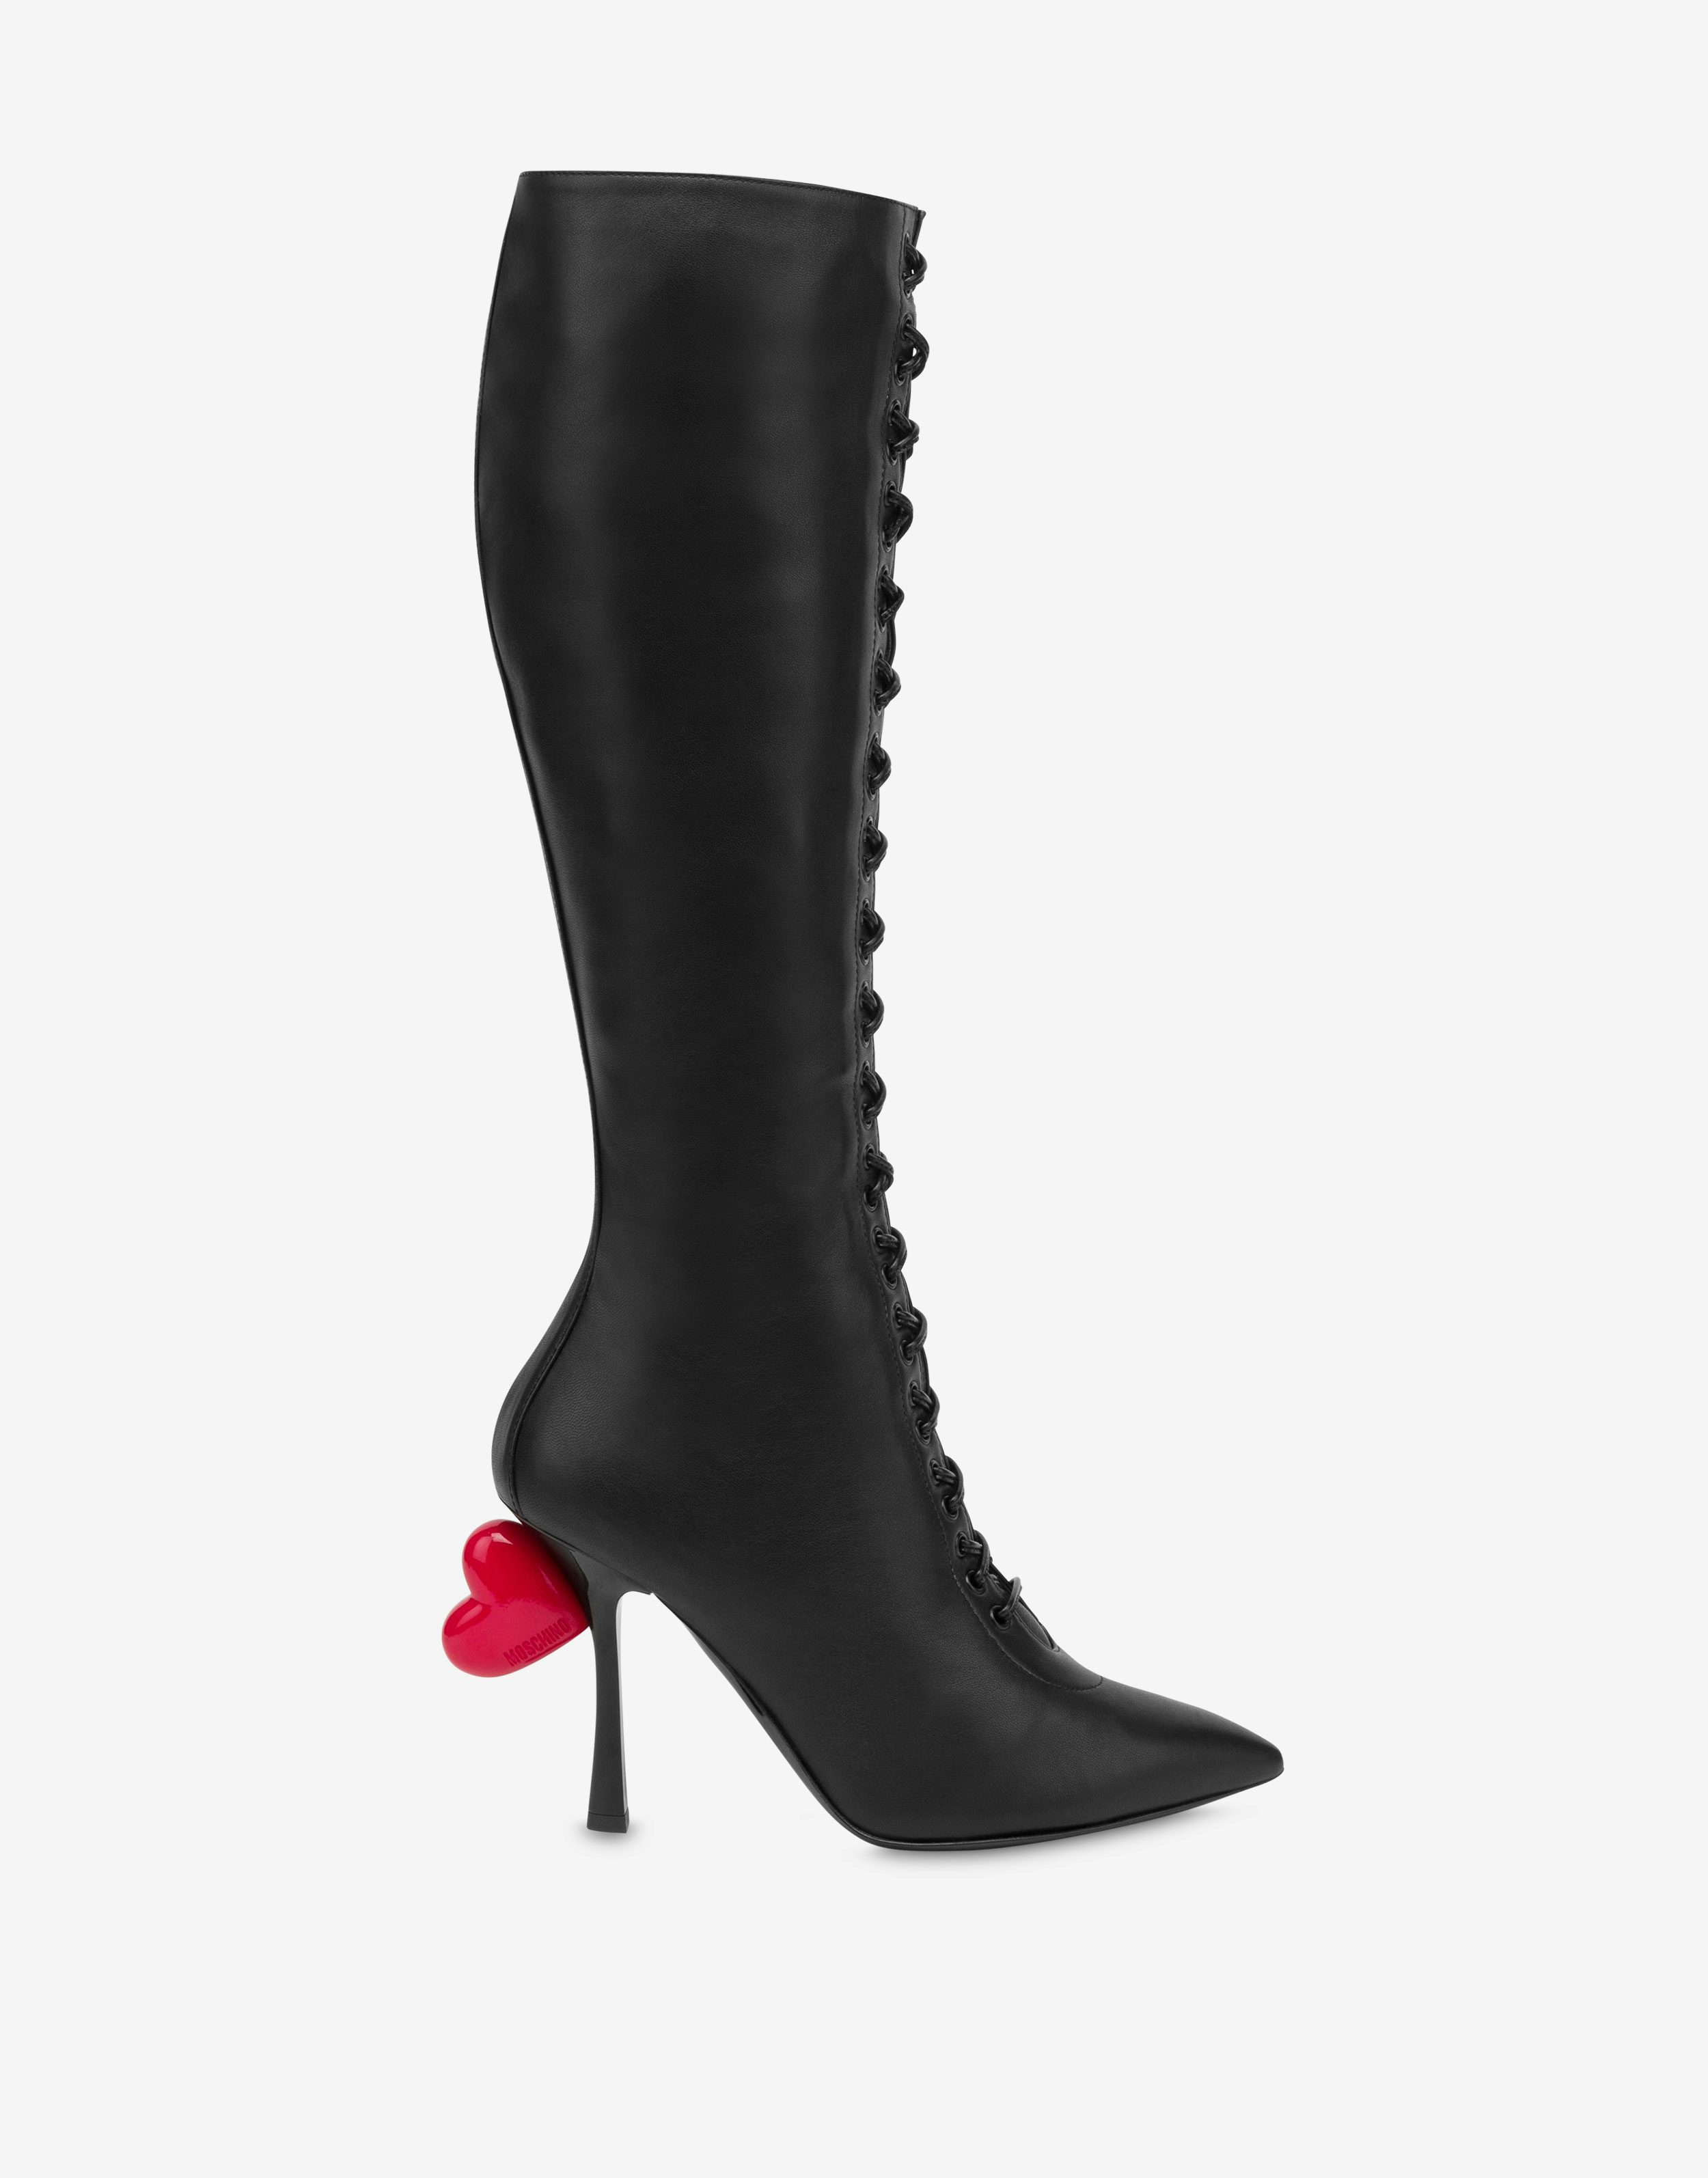 Moschino Boots & Ankle Boots for Women - Official Store